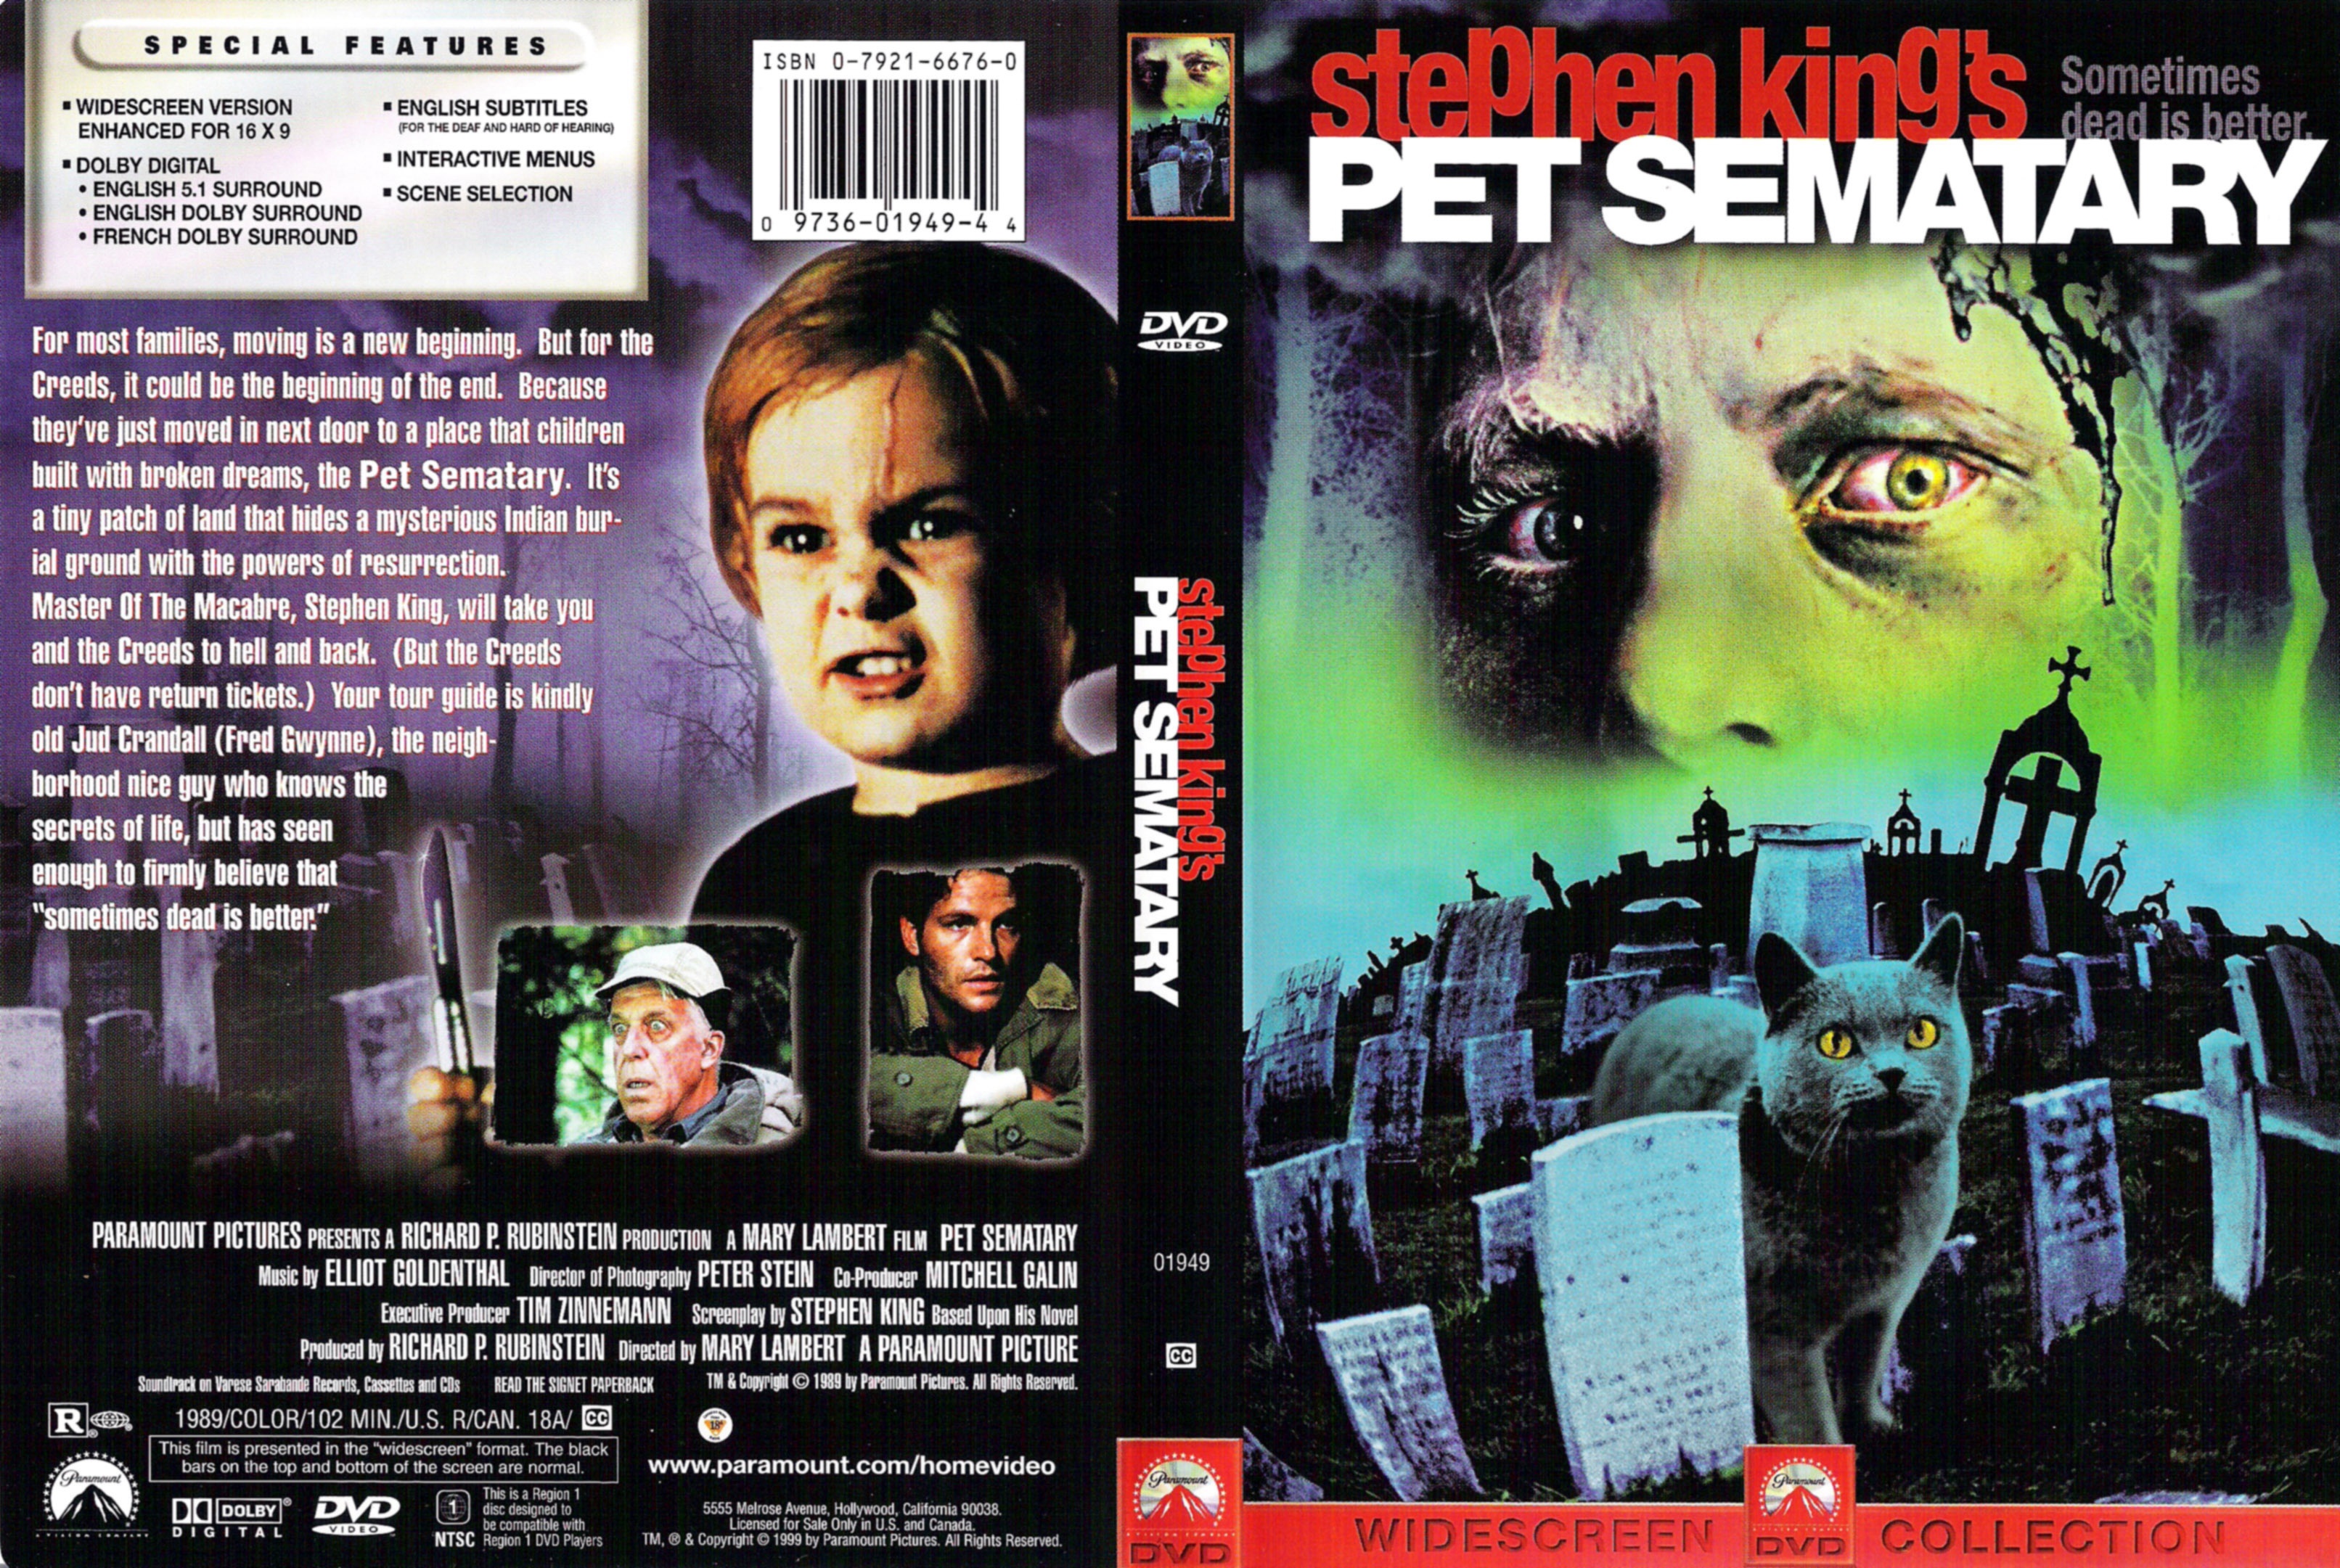 Jaquette DVD Pet sematary